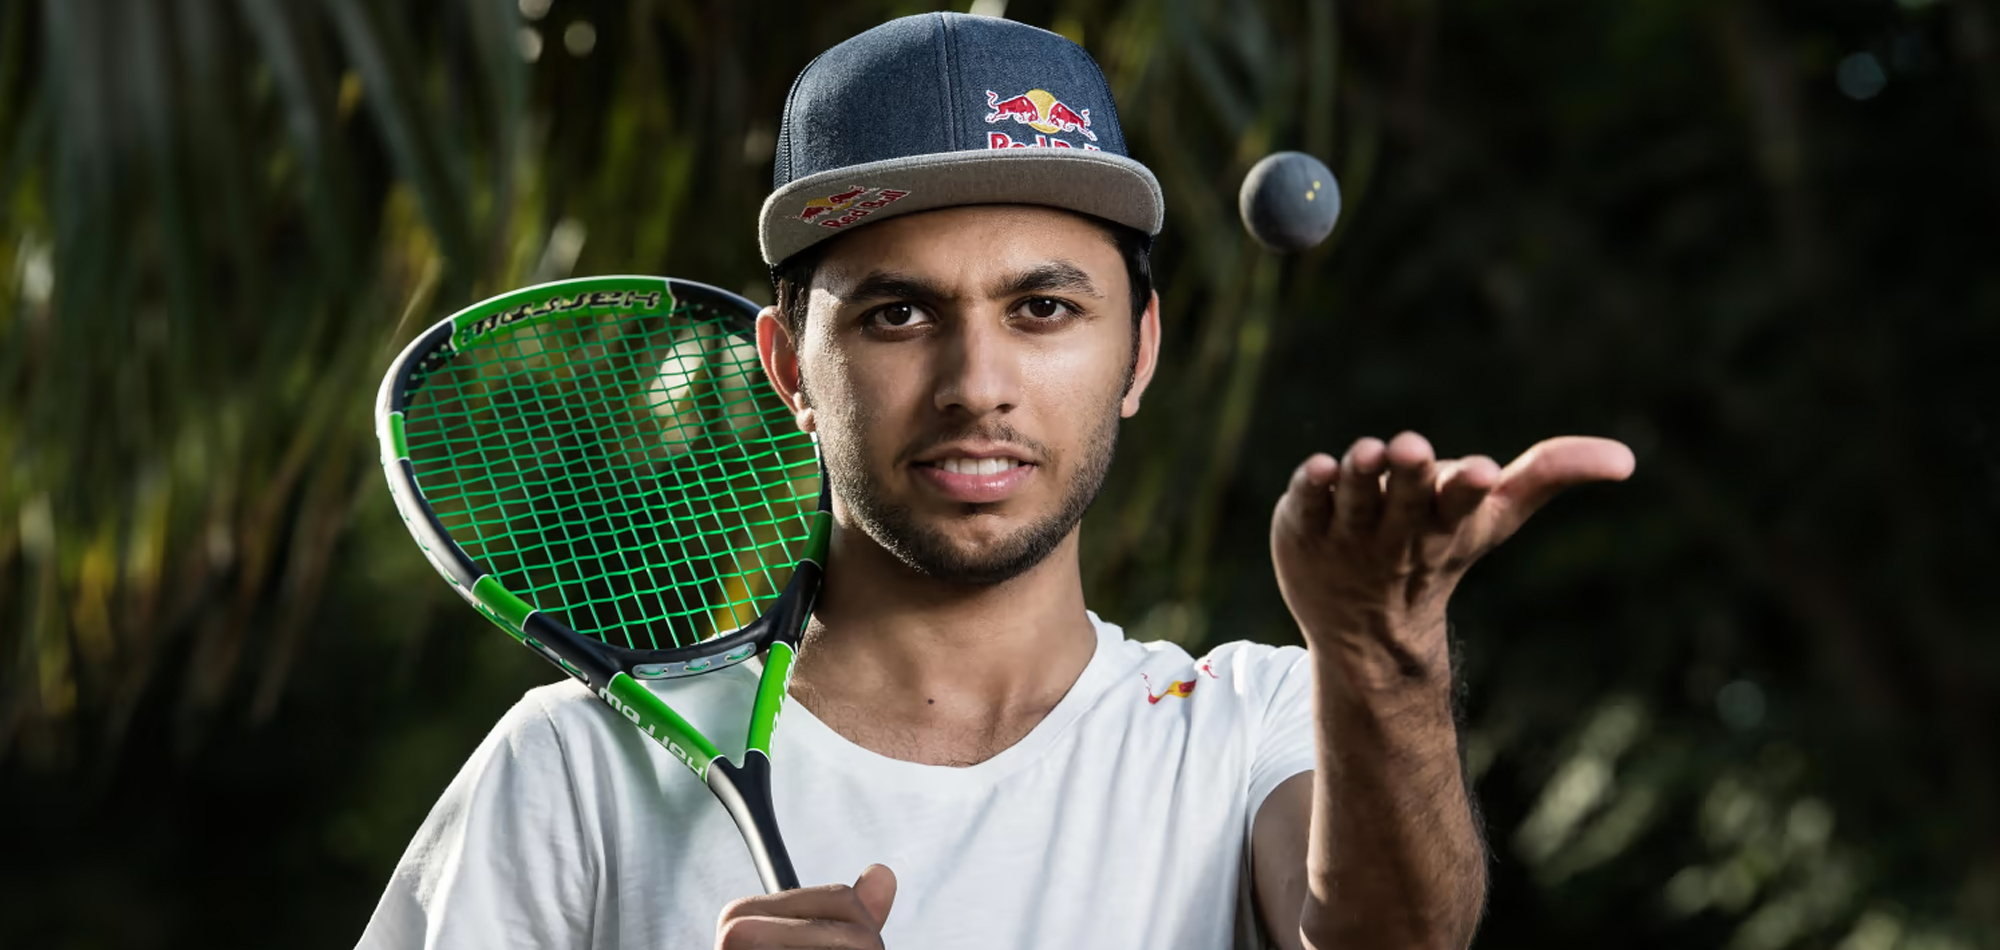 Al Tamimi jumps to 18 in the global rankings